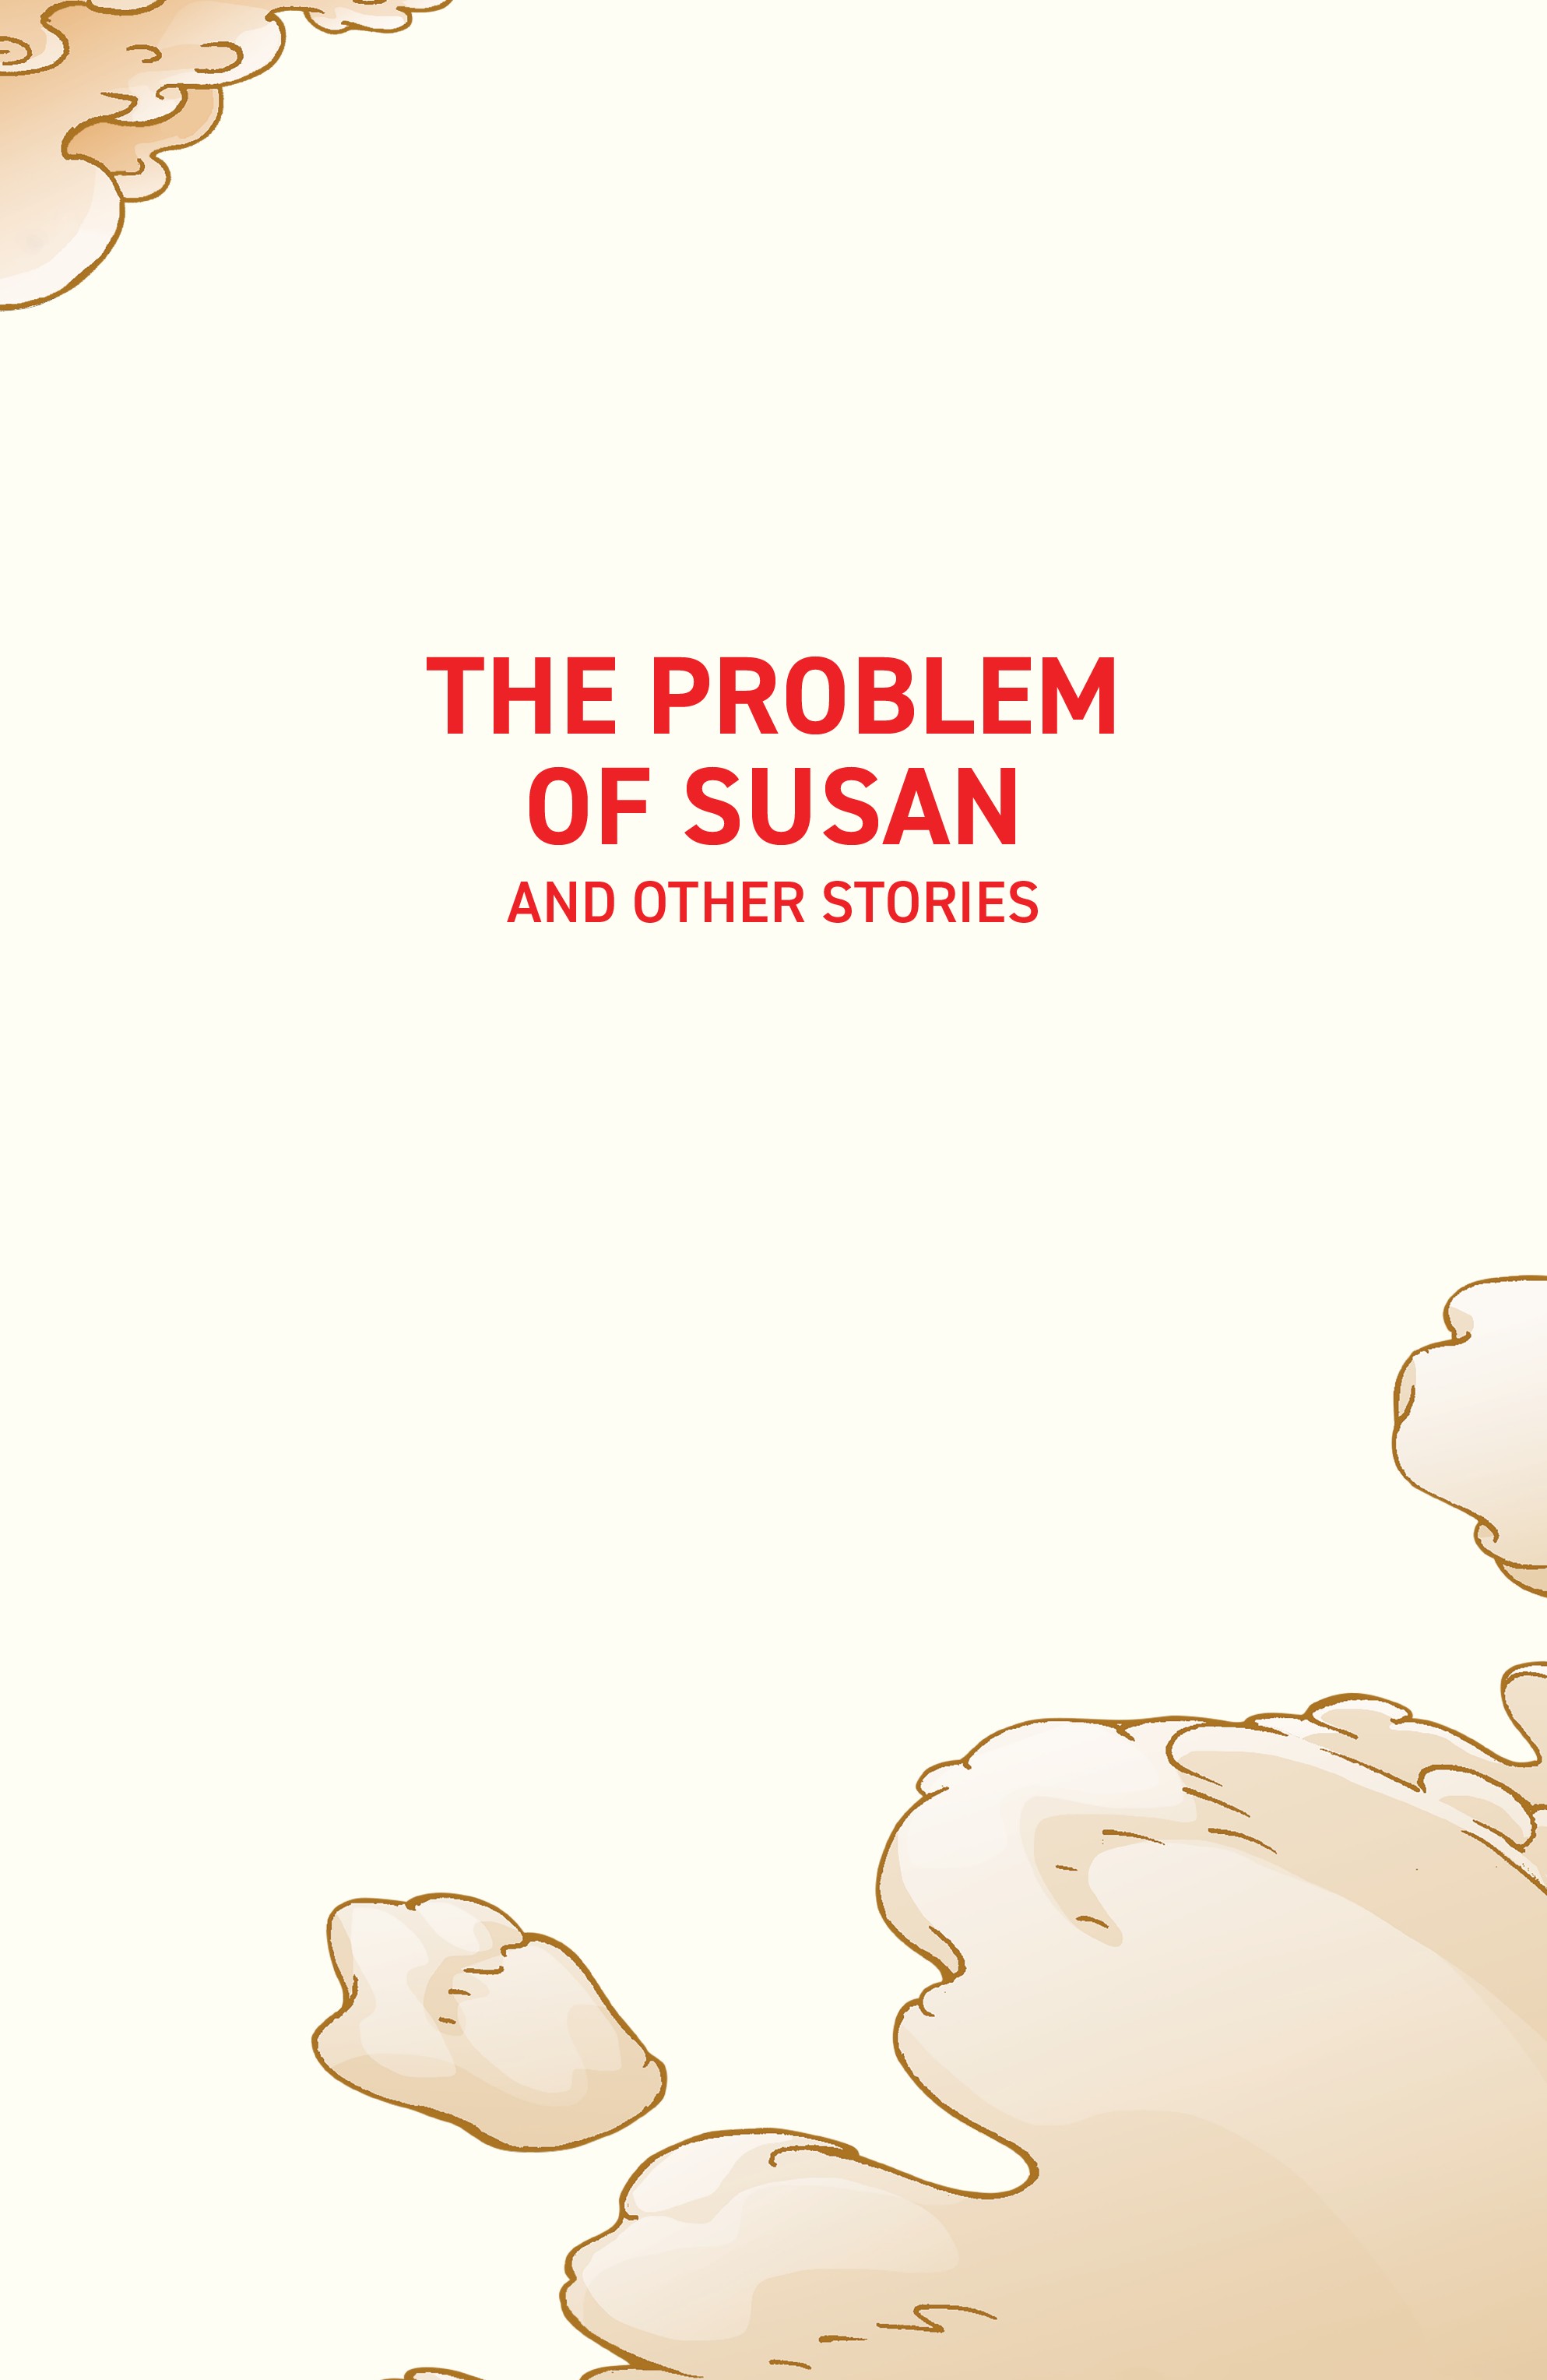 Read online The Problem of Susan and Other Stories comic -  Issue # TPB - 3